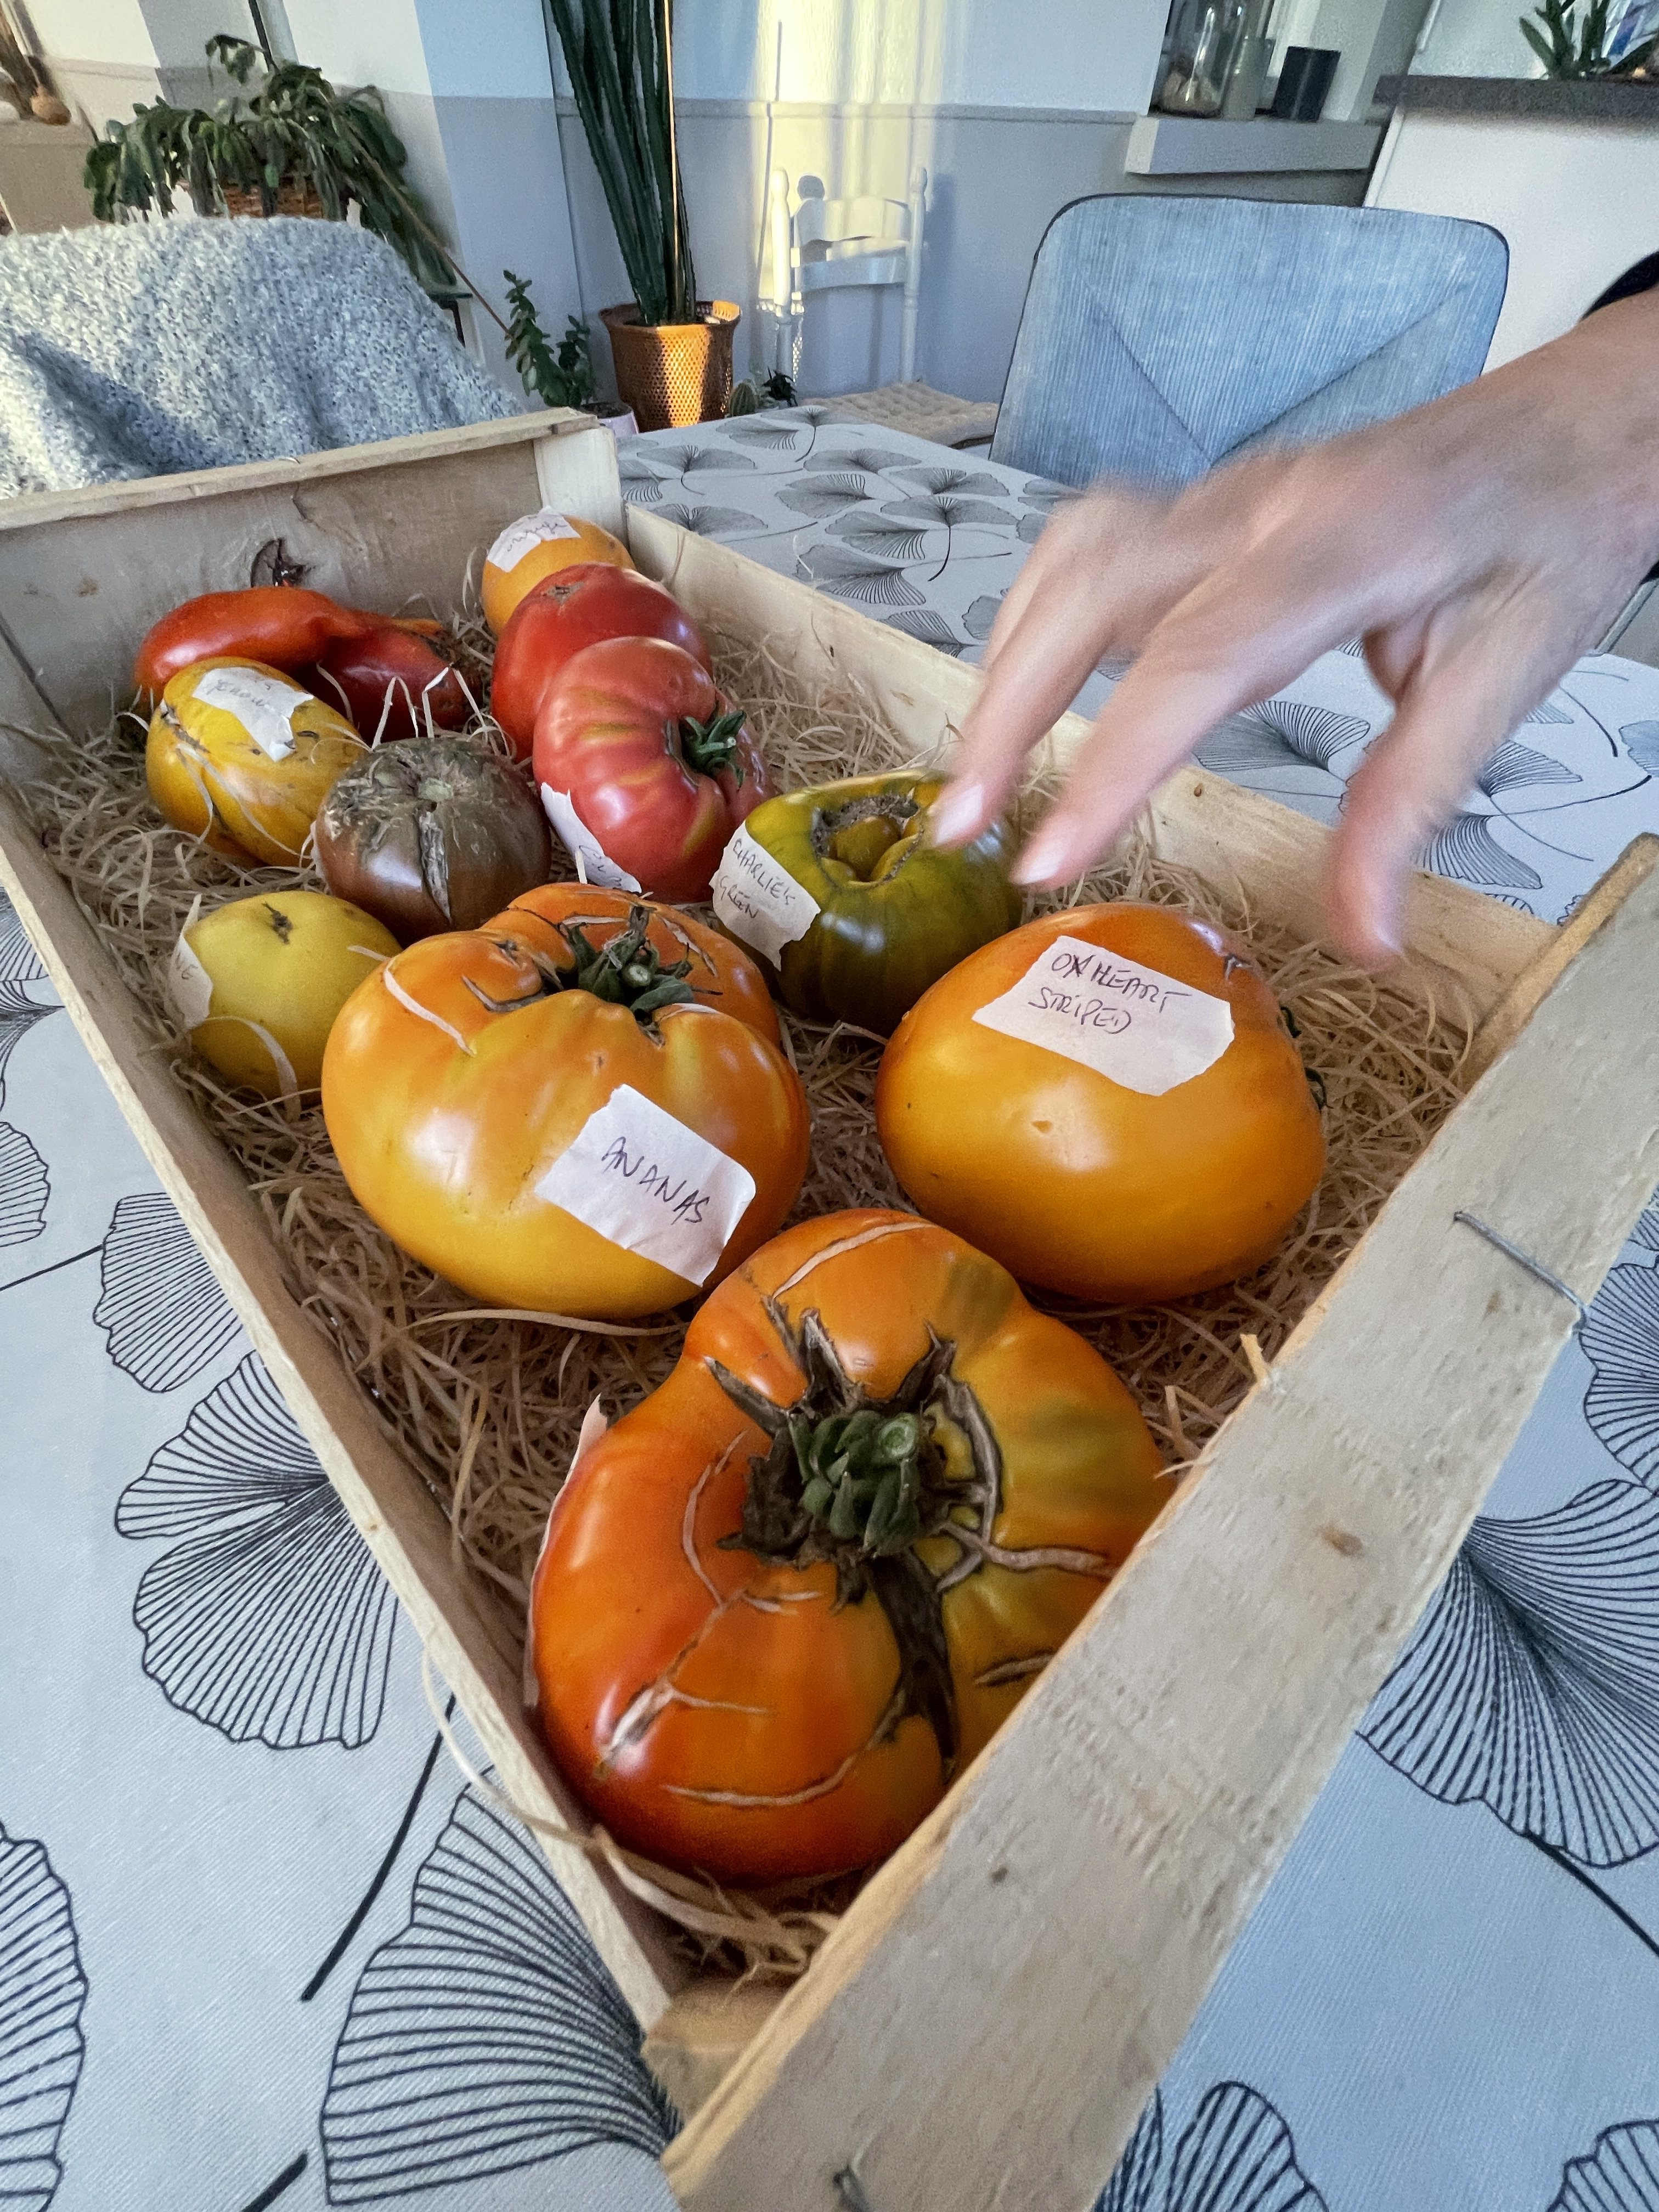 Part of Jacky and Myriam Deschamps’s 2022 tomato harvest from their garden in Tours, France. They send their tomatoes to Myriam’s son, Guillaume Galliot, chef at three-Michelin-star Caprice in Hong Kong. Photo: Chris Dwyer